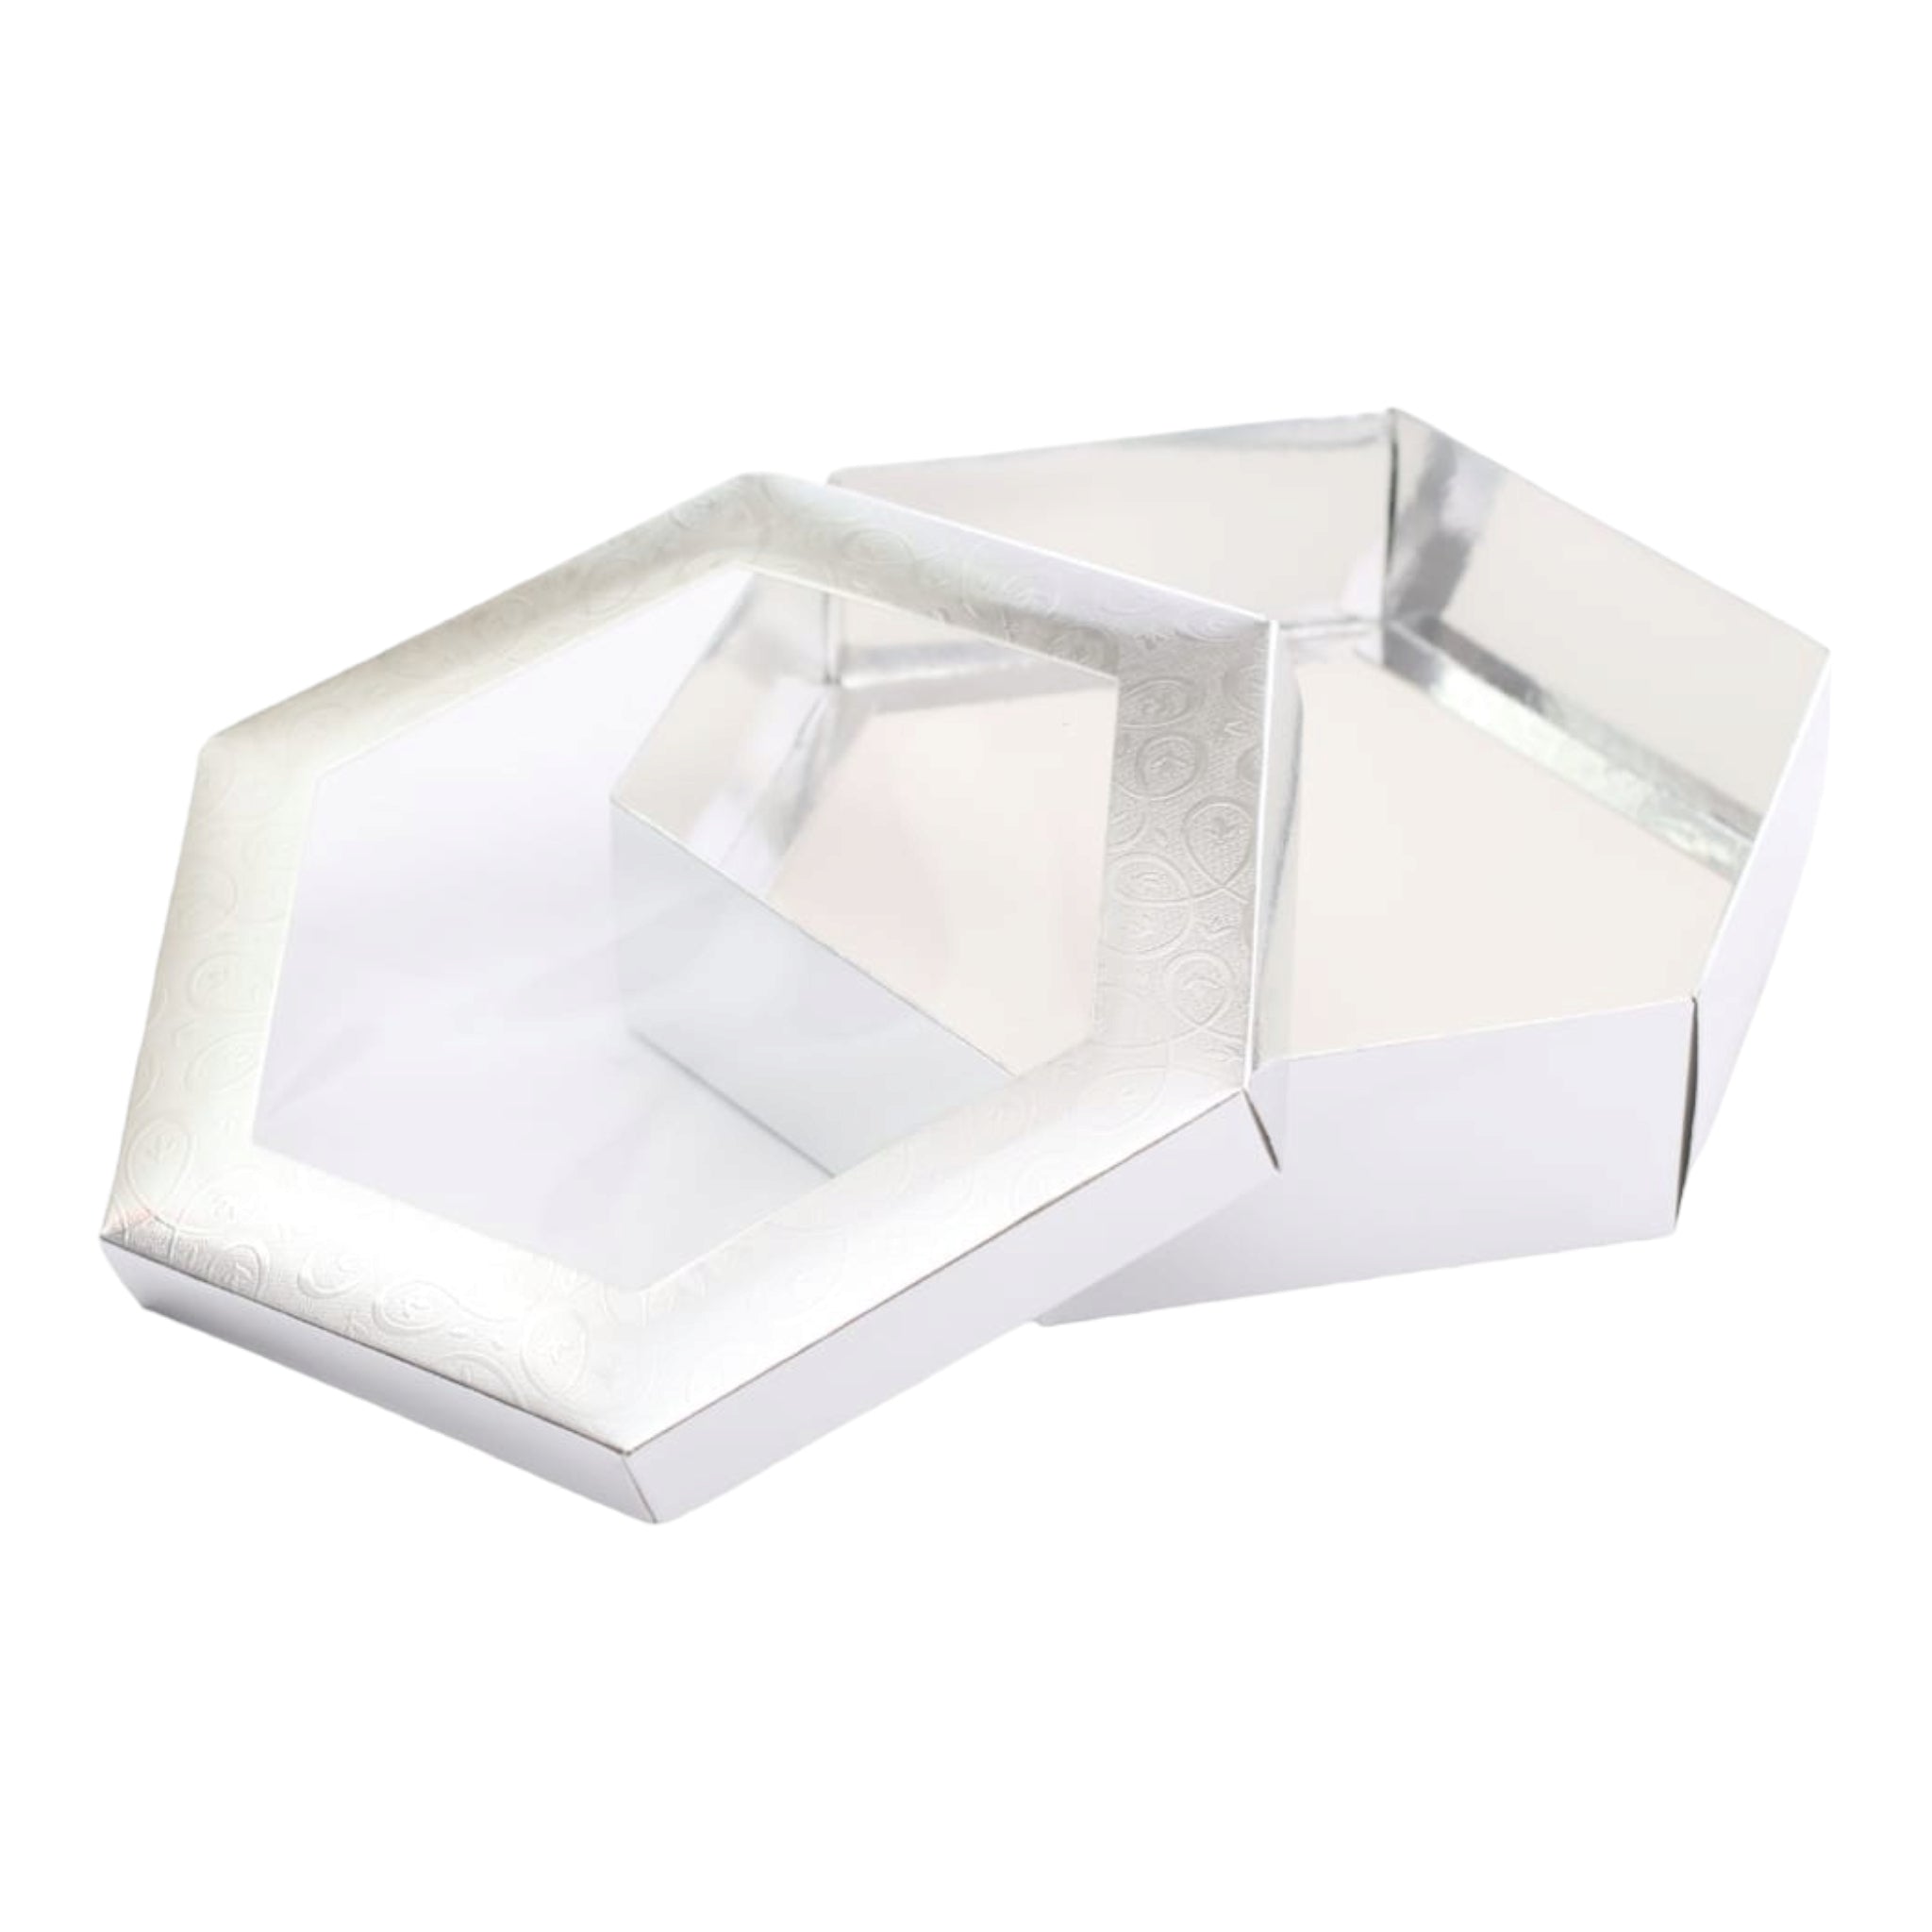 Gift Biscuit Paper Box Hexagon Silver 19x19x5cm Clear Window XPP239-S